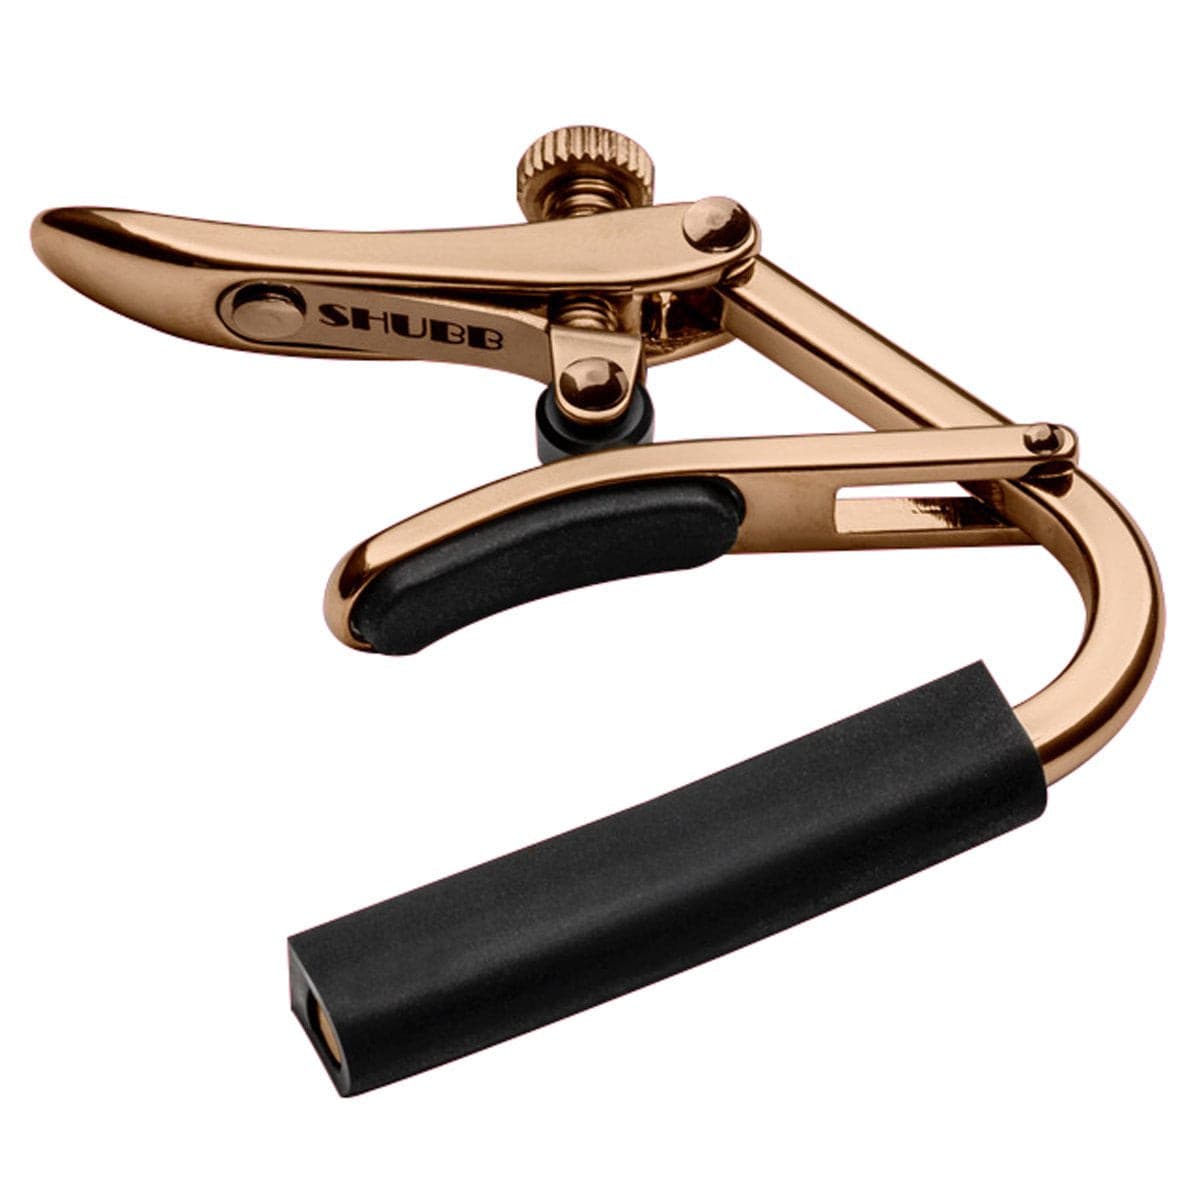 Shubb 'Capo Royale' Electric Guitar Capo - Rose Gold, Accessory for sale at Richards Guitars.